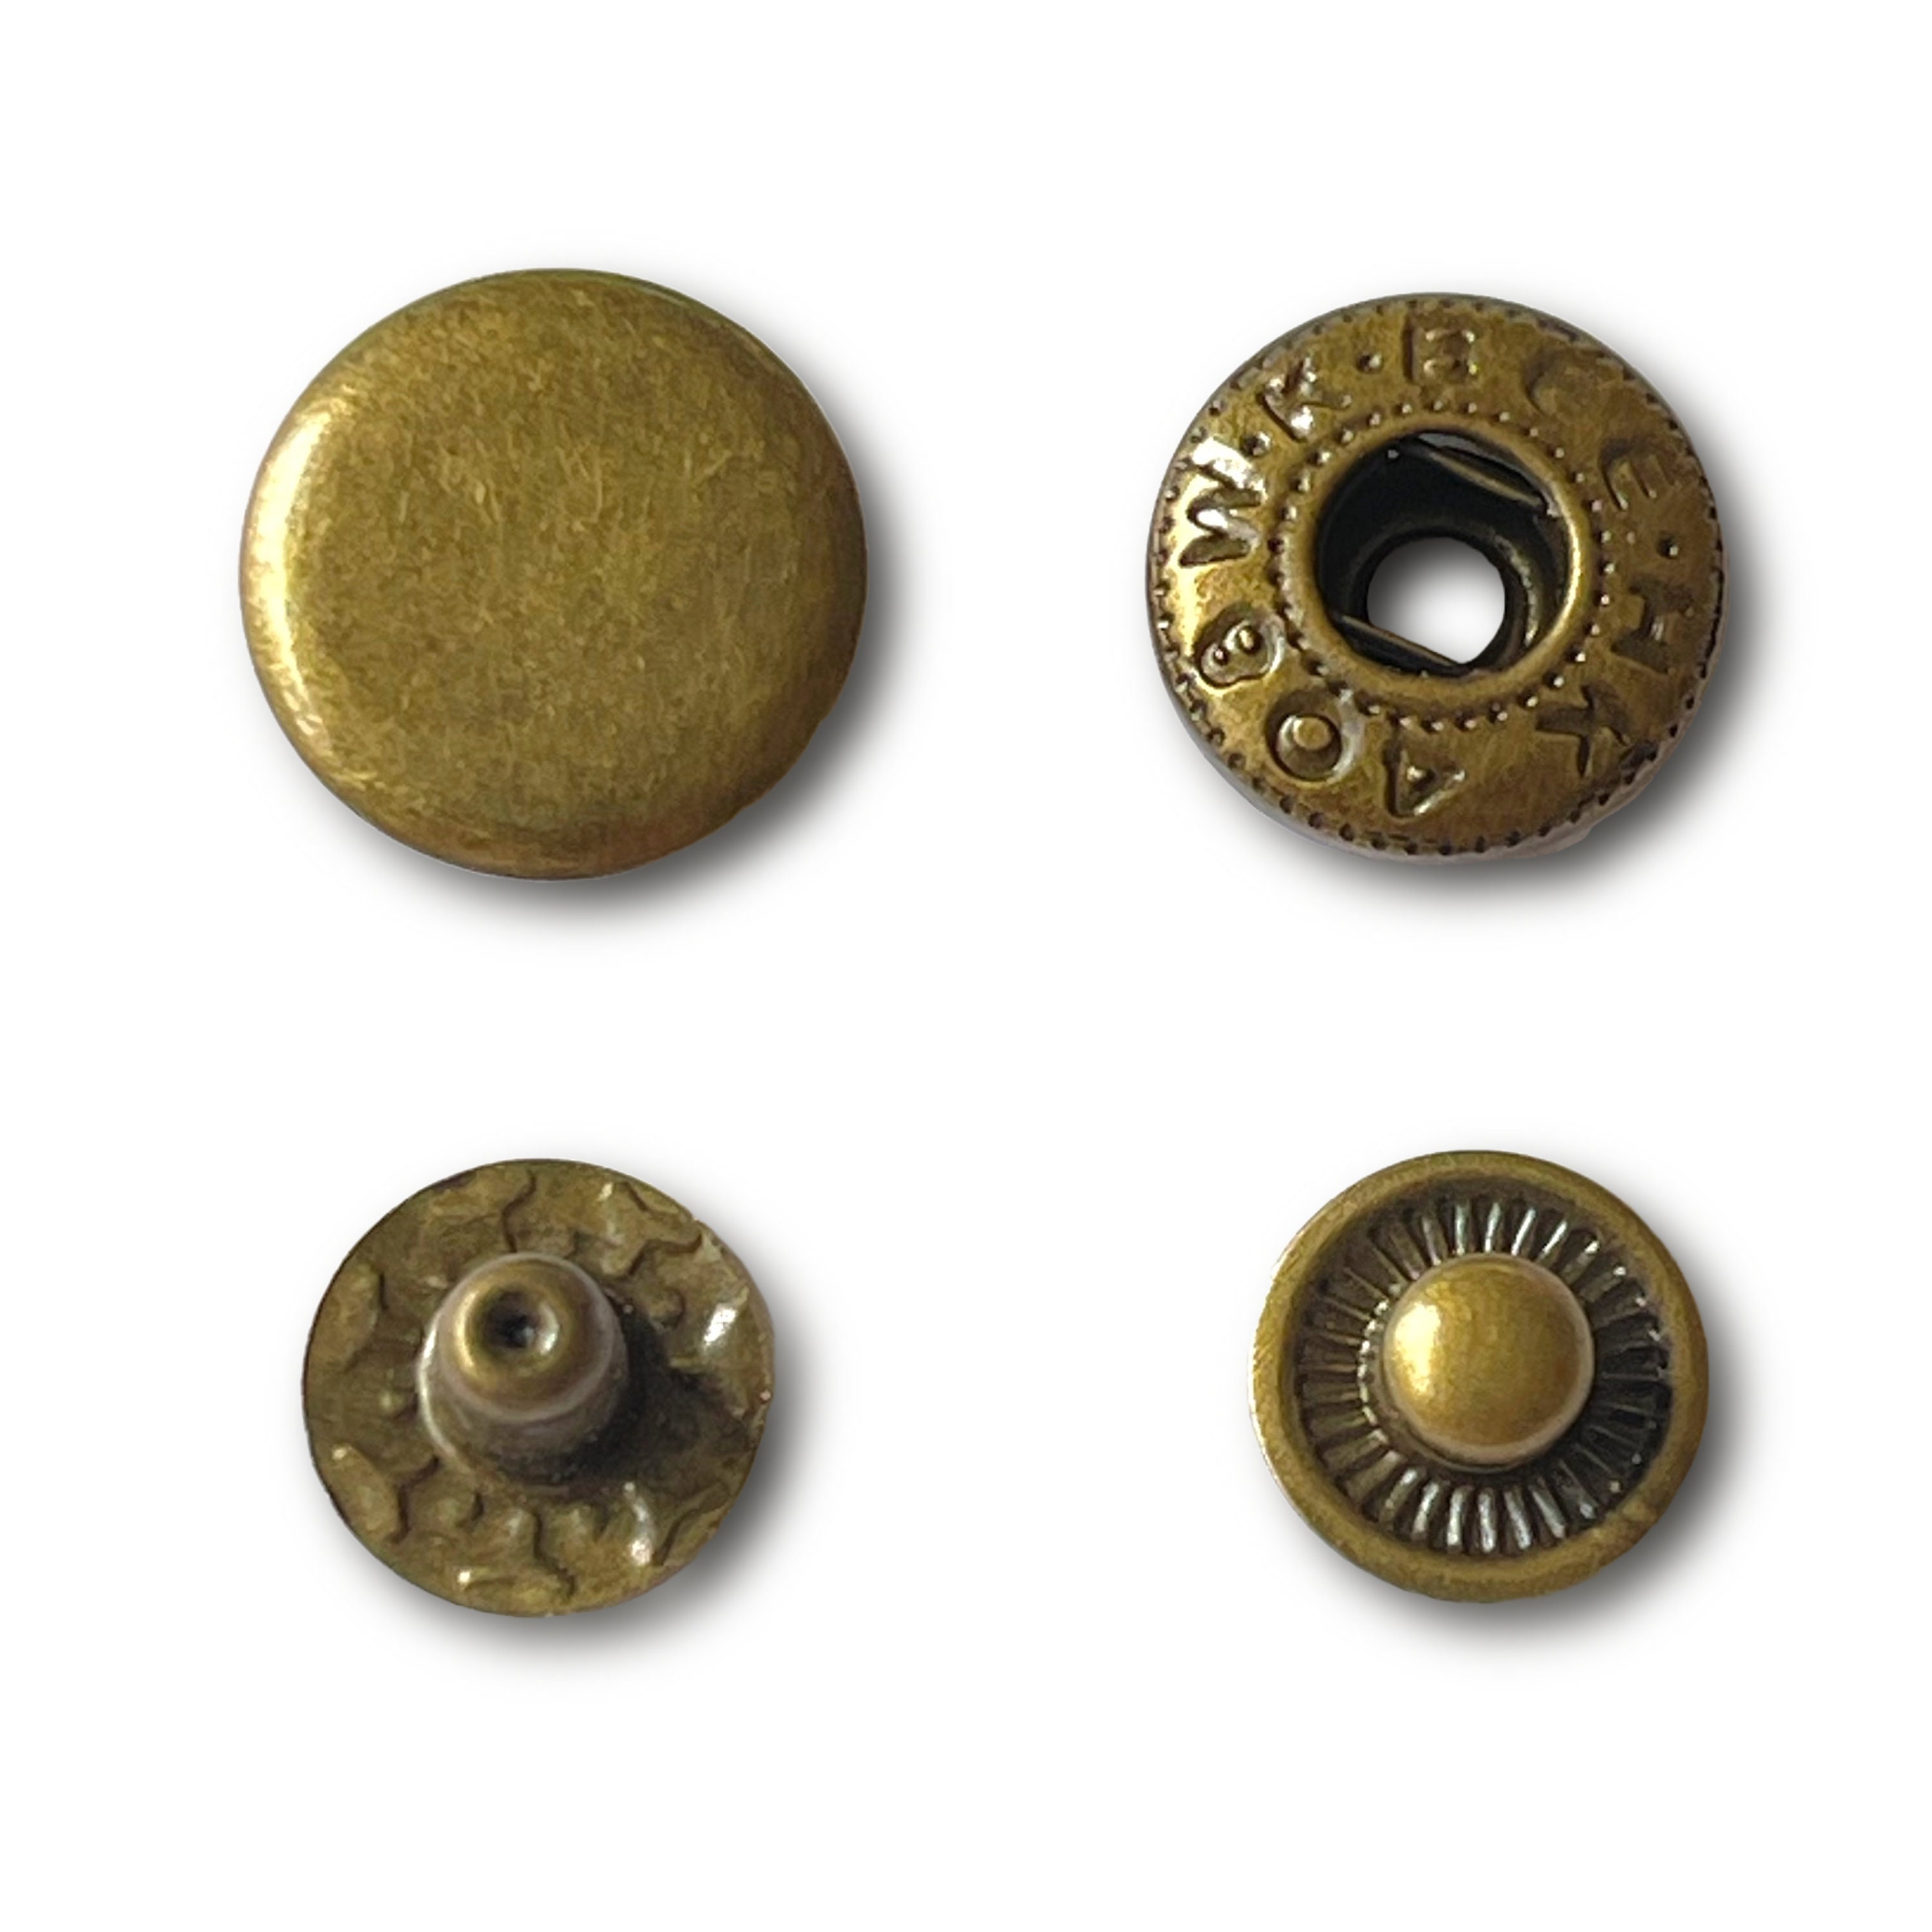 SALE Vintage Button Cover and Snap Kit, Assorted Metal Cover